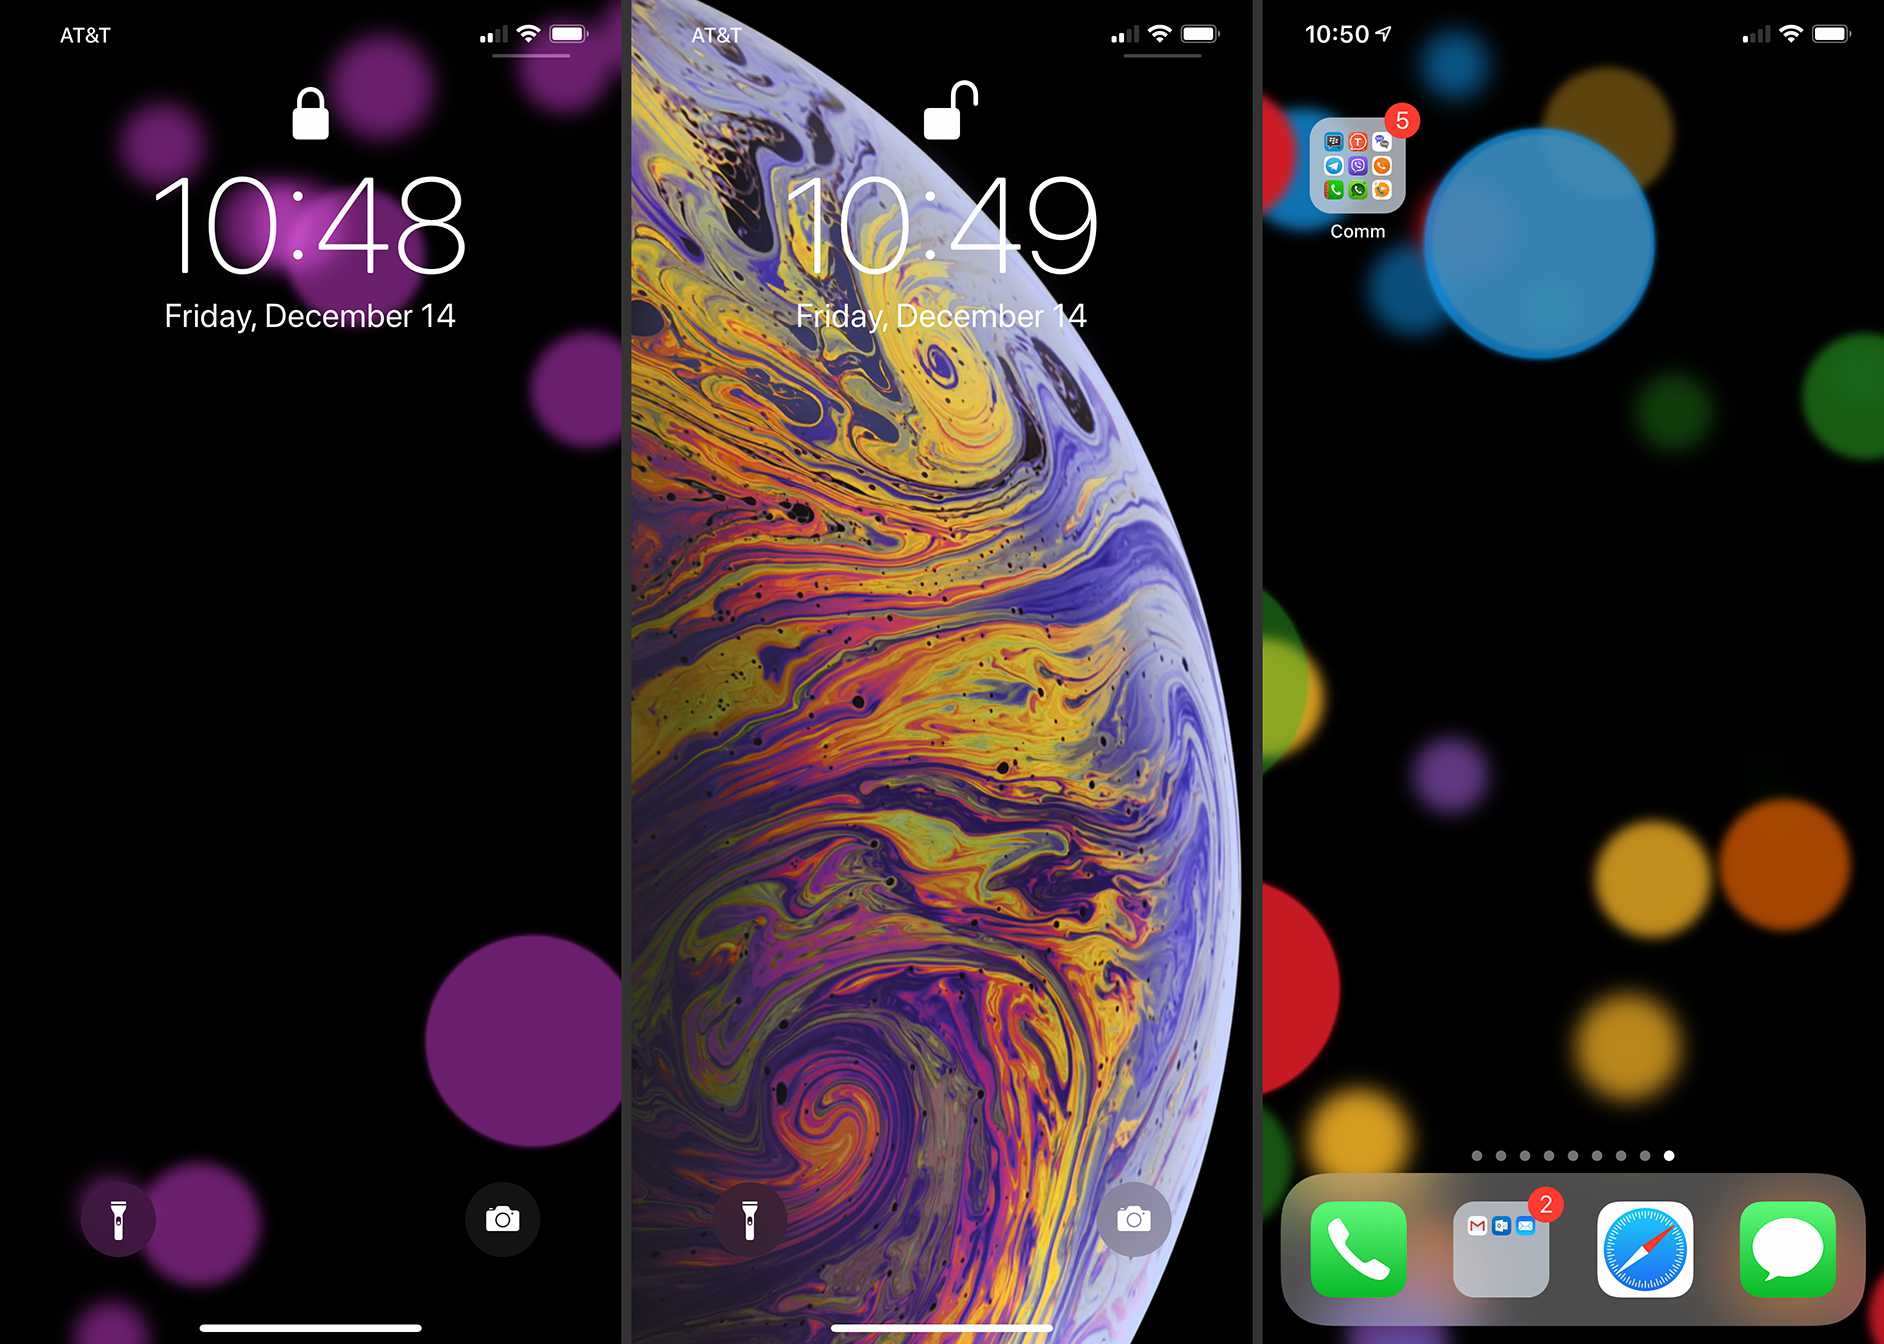 How to Use Live Wallpapers on Your iPhone